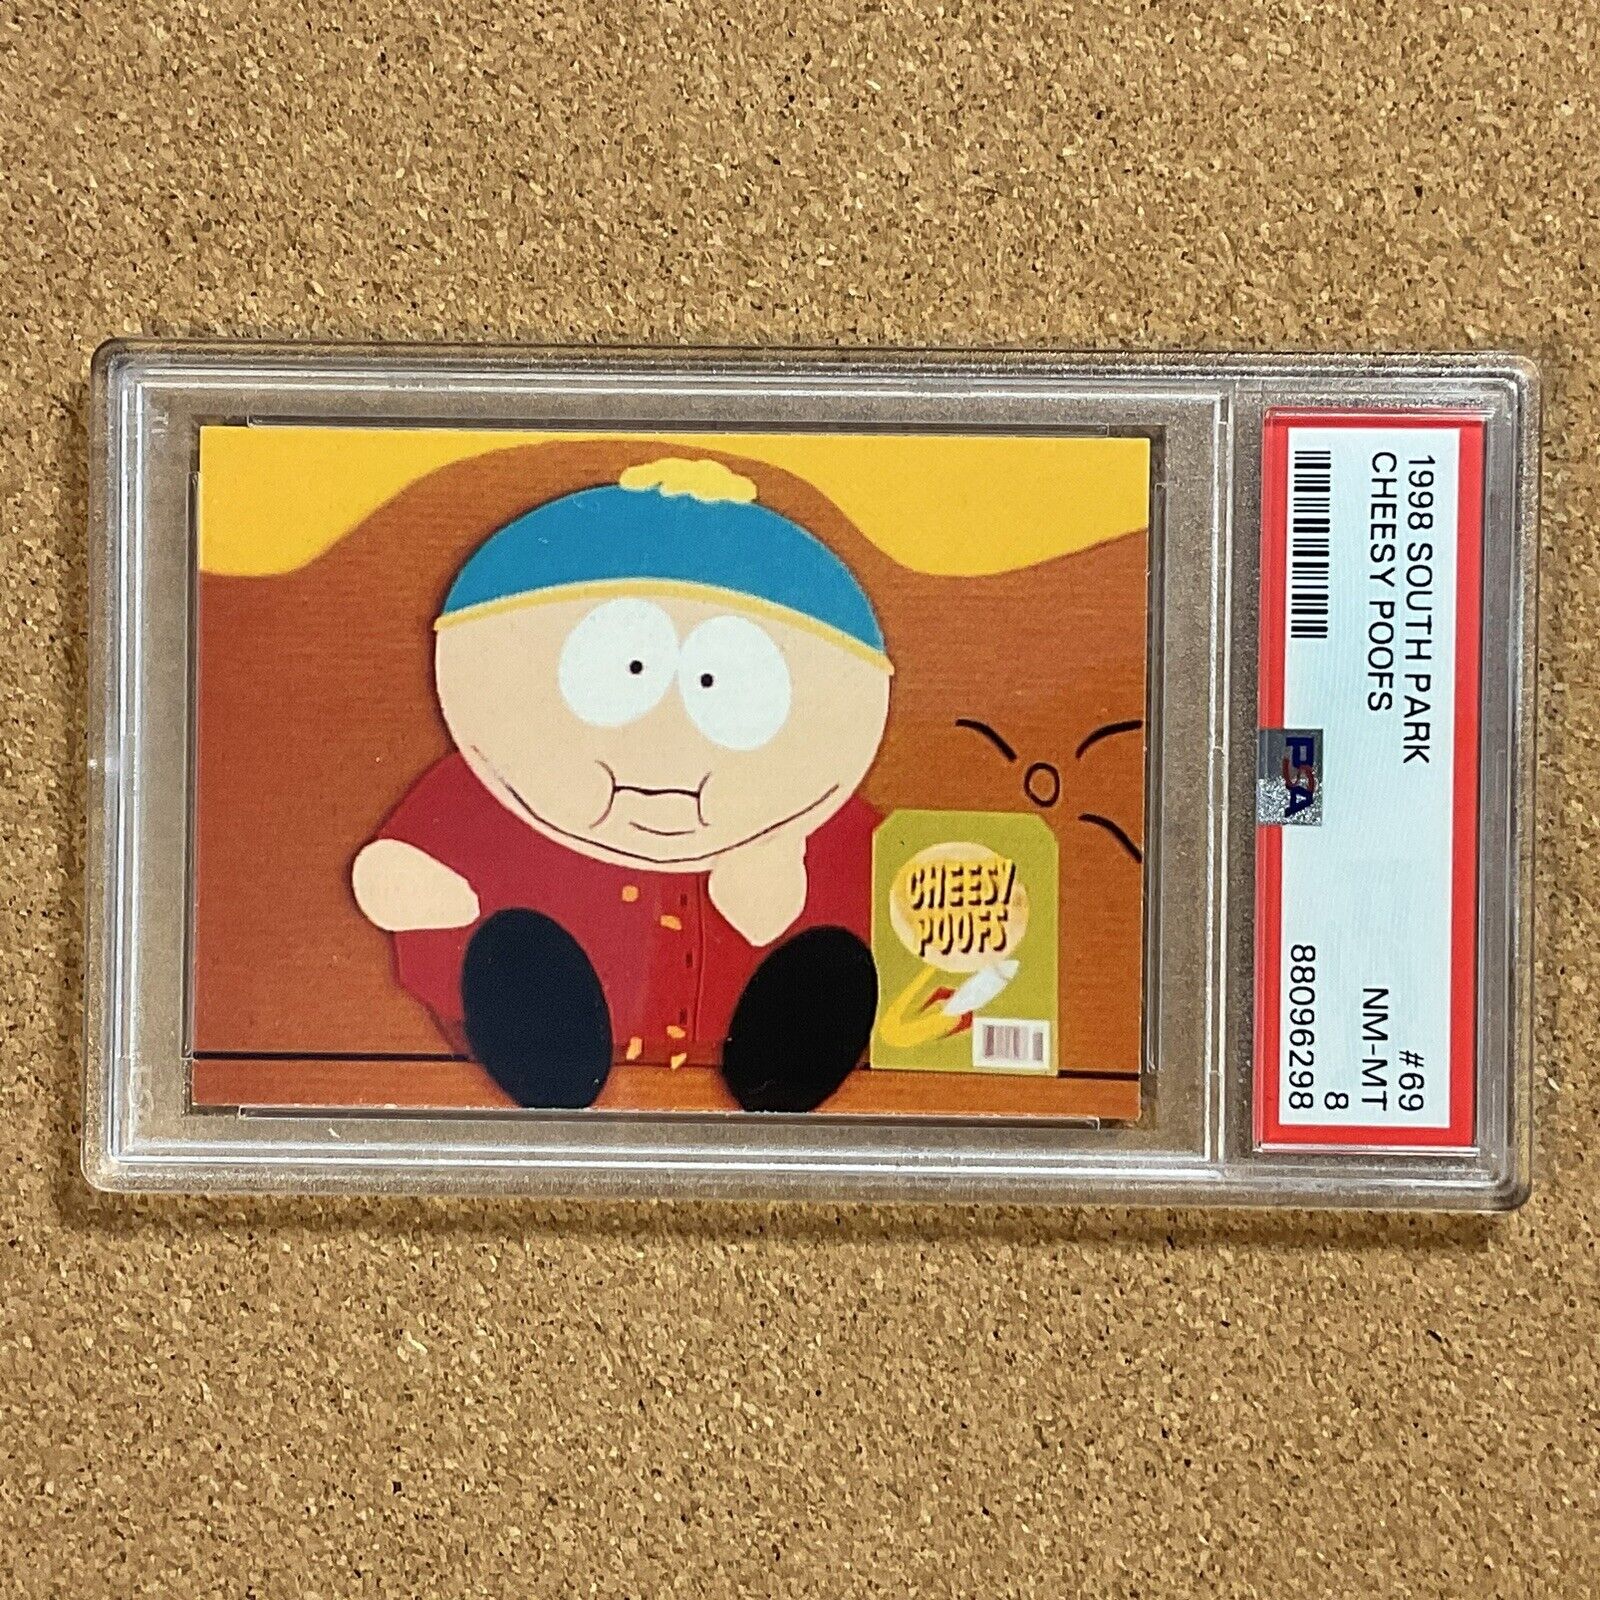 SOUTH PARK #69 CHEESY POOFS 1998 COMIC IMAGES ERIC CARTMAN - PSA 8 NM/MT